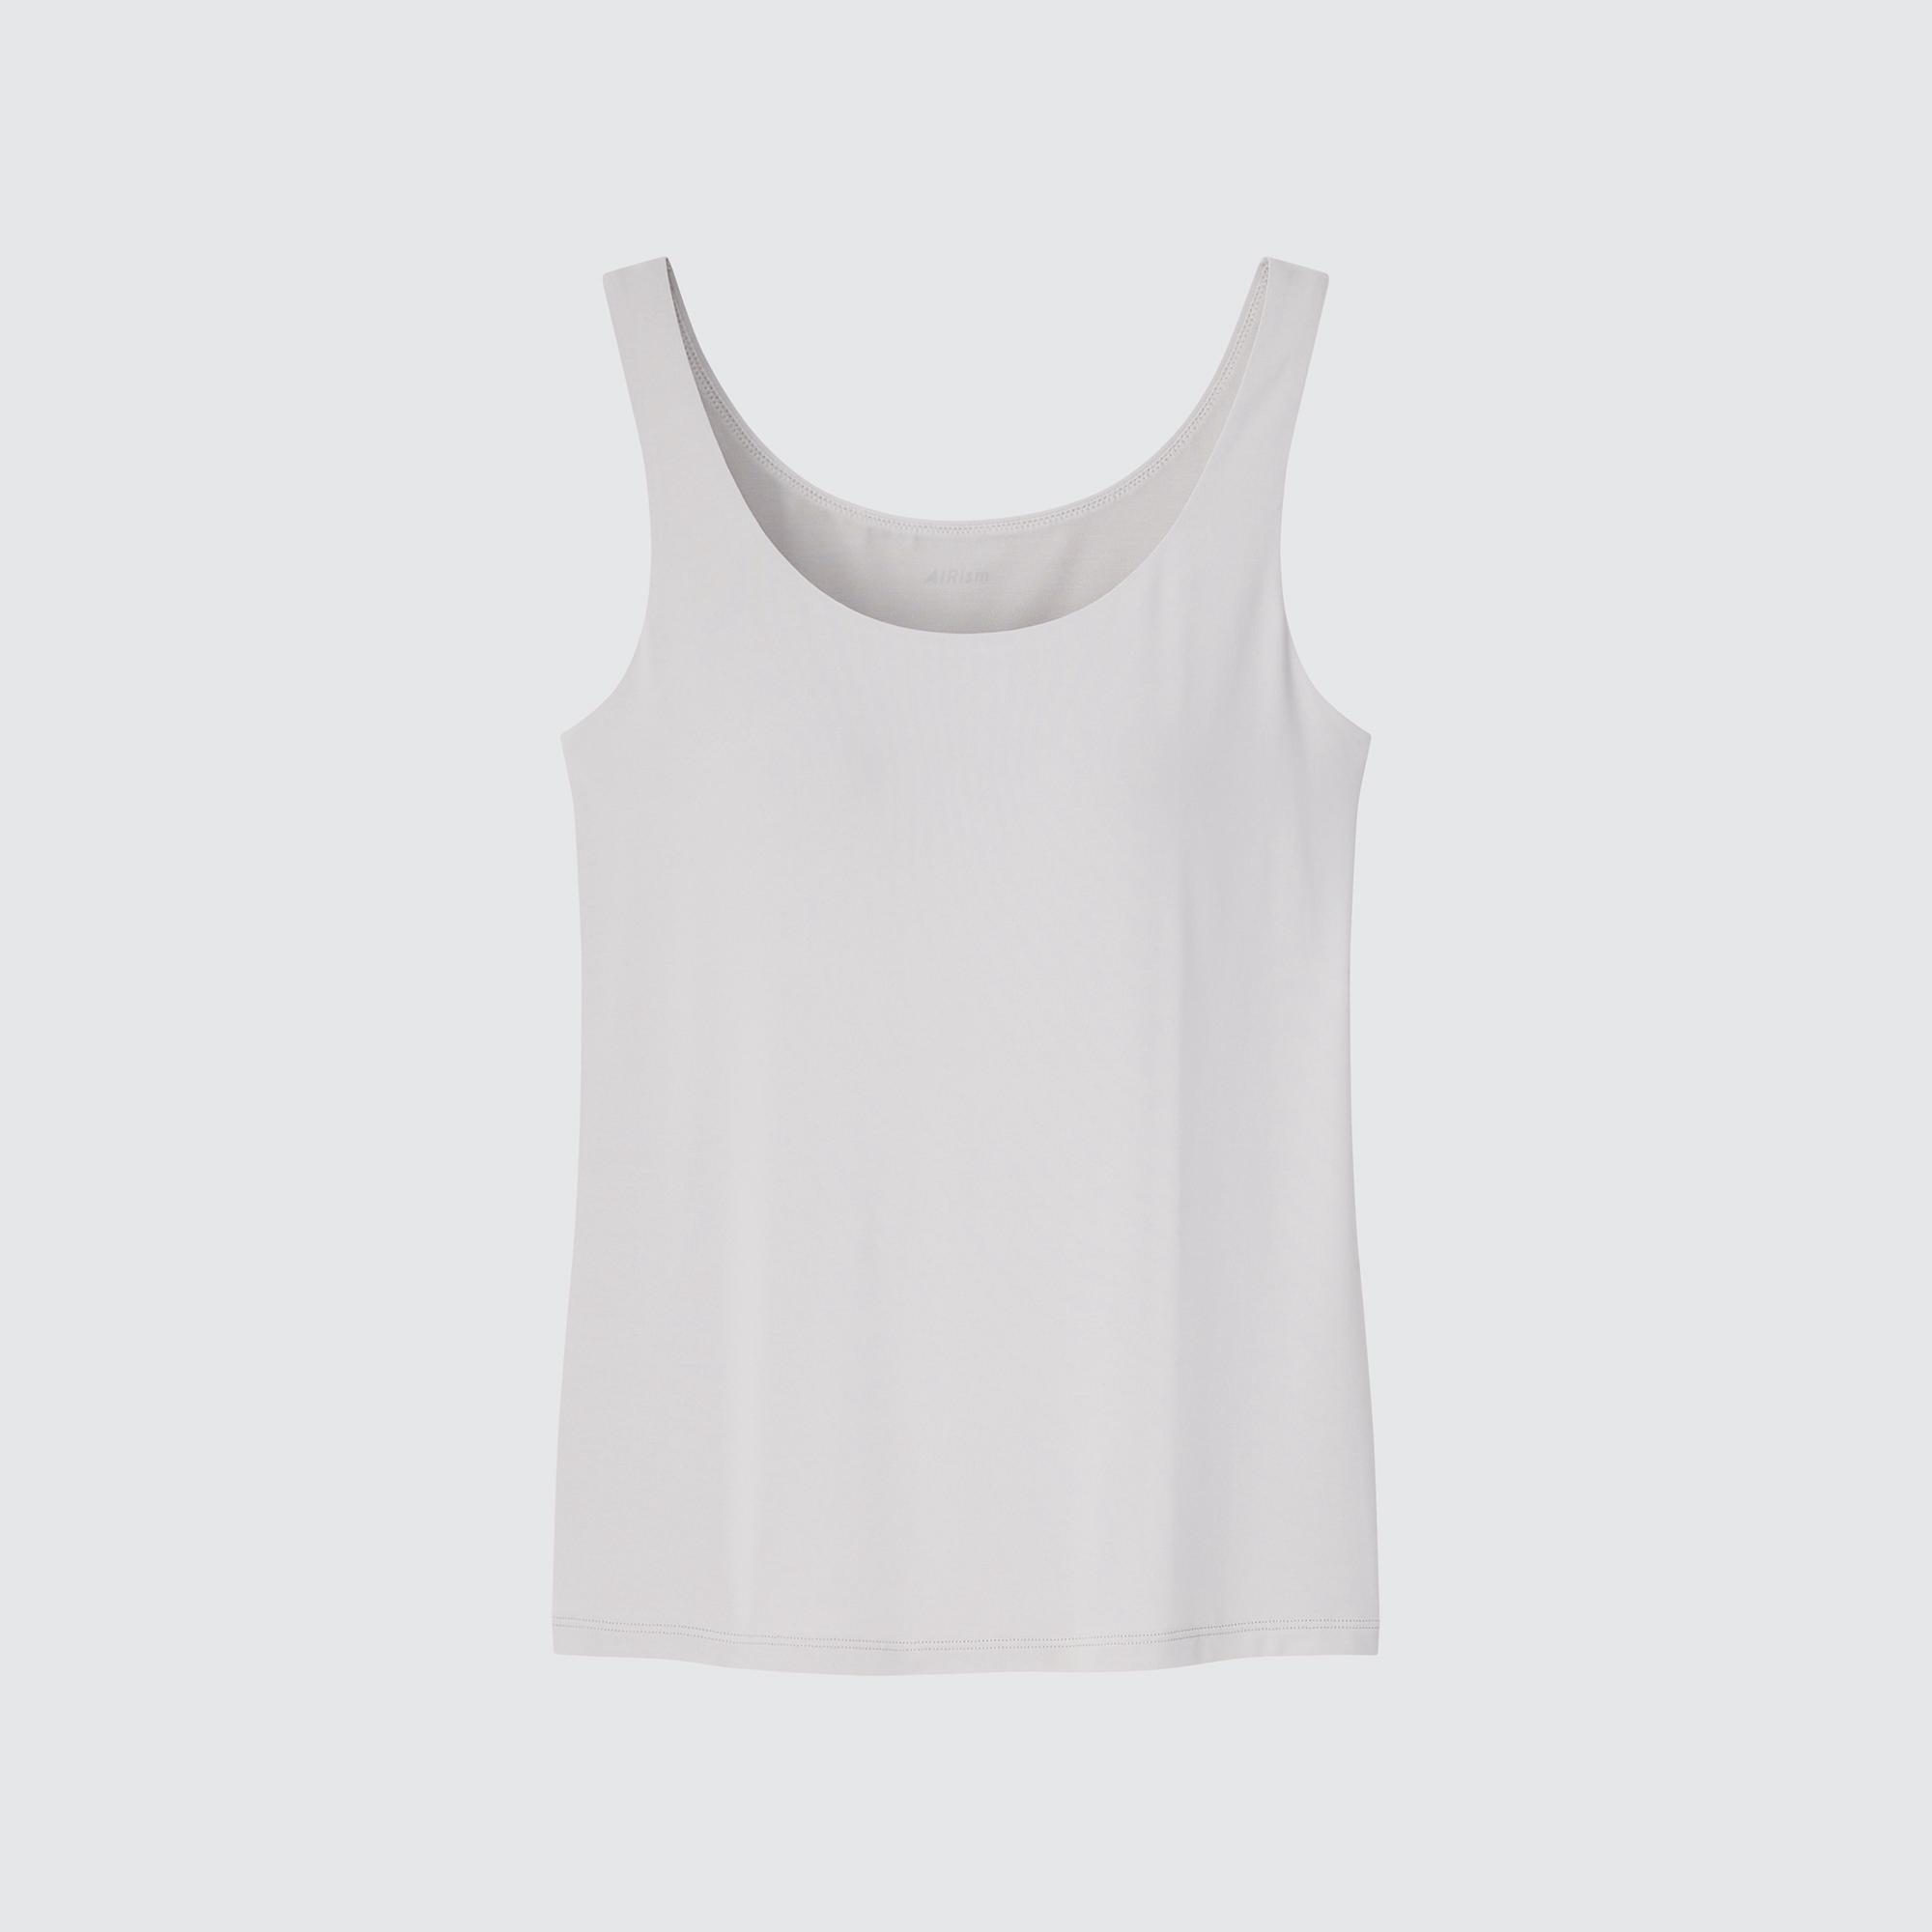 Airism Racerback Bra Sleeveless Top  HeadsUp Uniqlo Is a Surprising  Source of Affordable Fitness Wear  POPSUGAR Fitness Photo 2